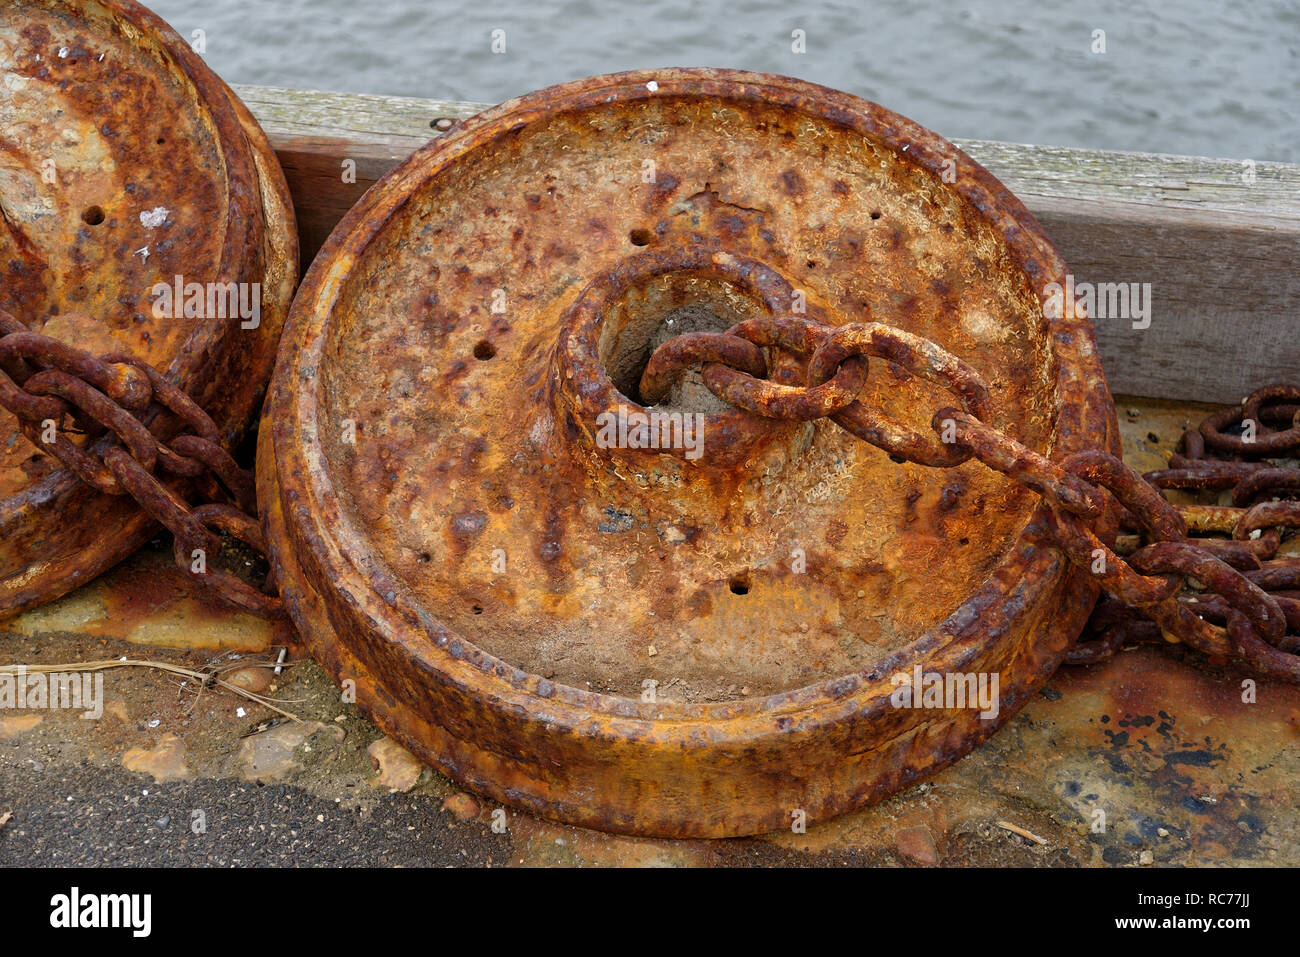 Metal weights for sea moorings and buoys. Stock Photo